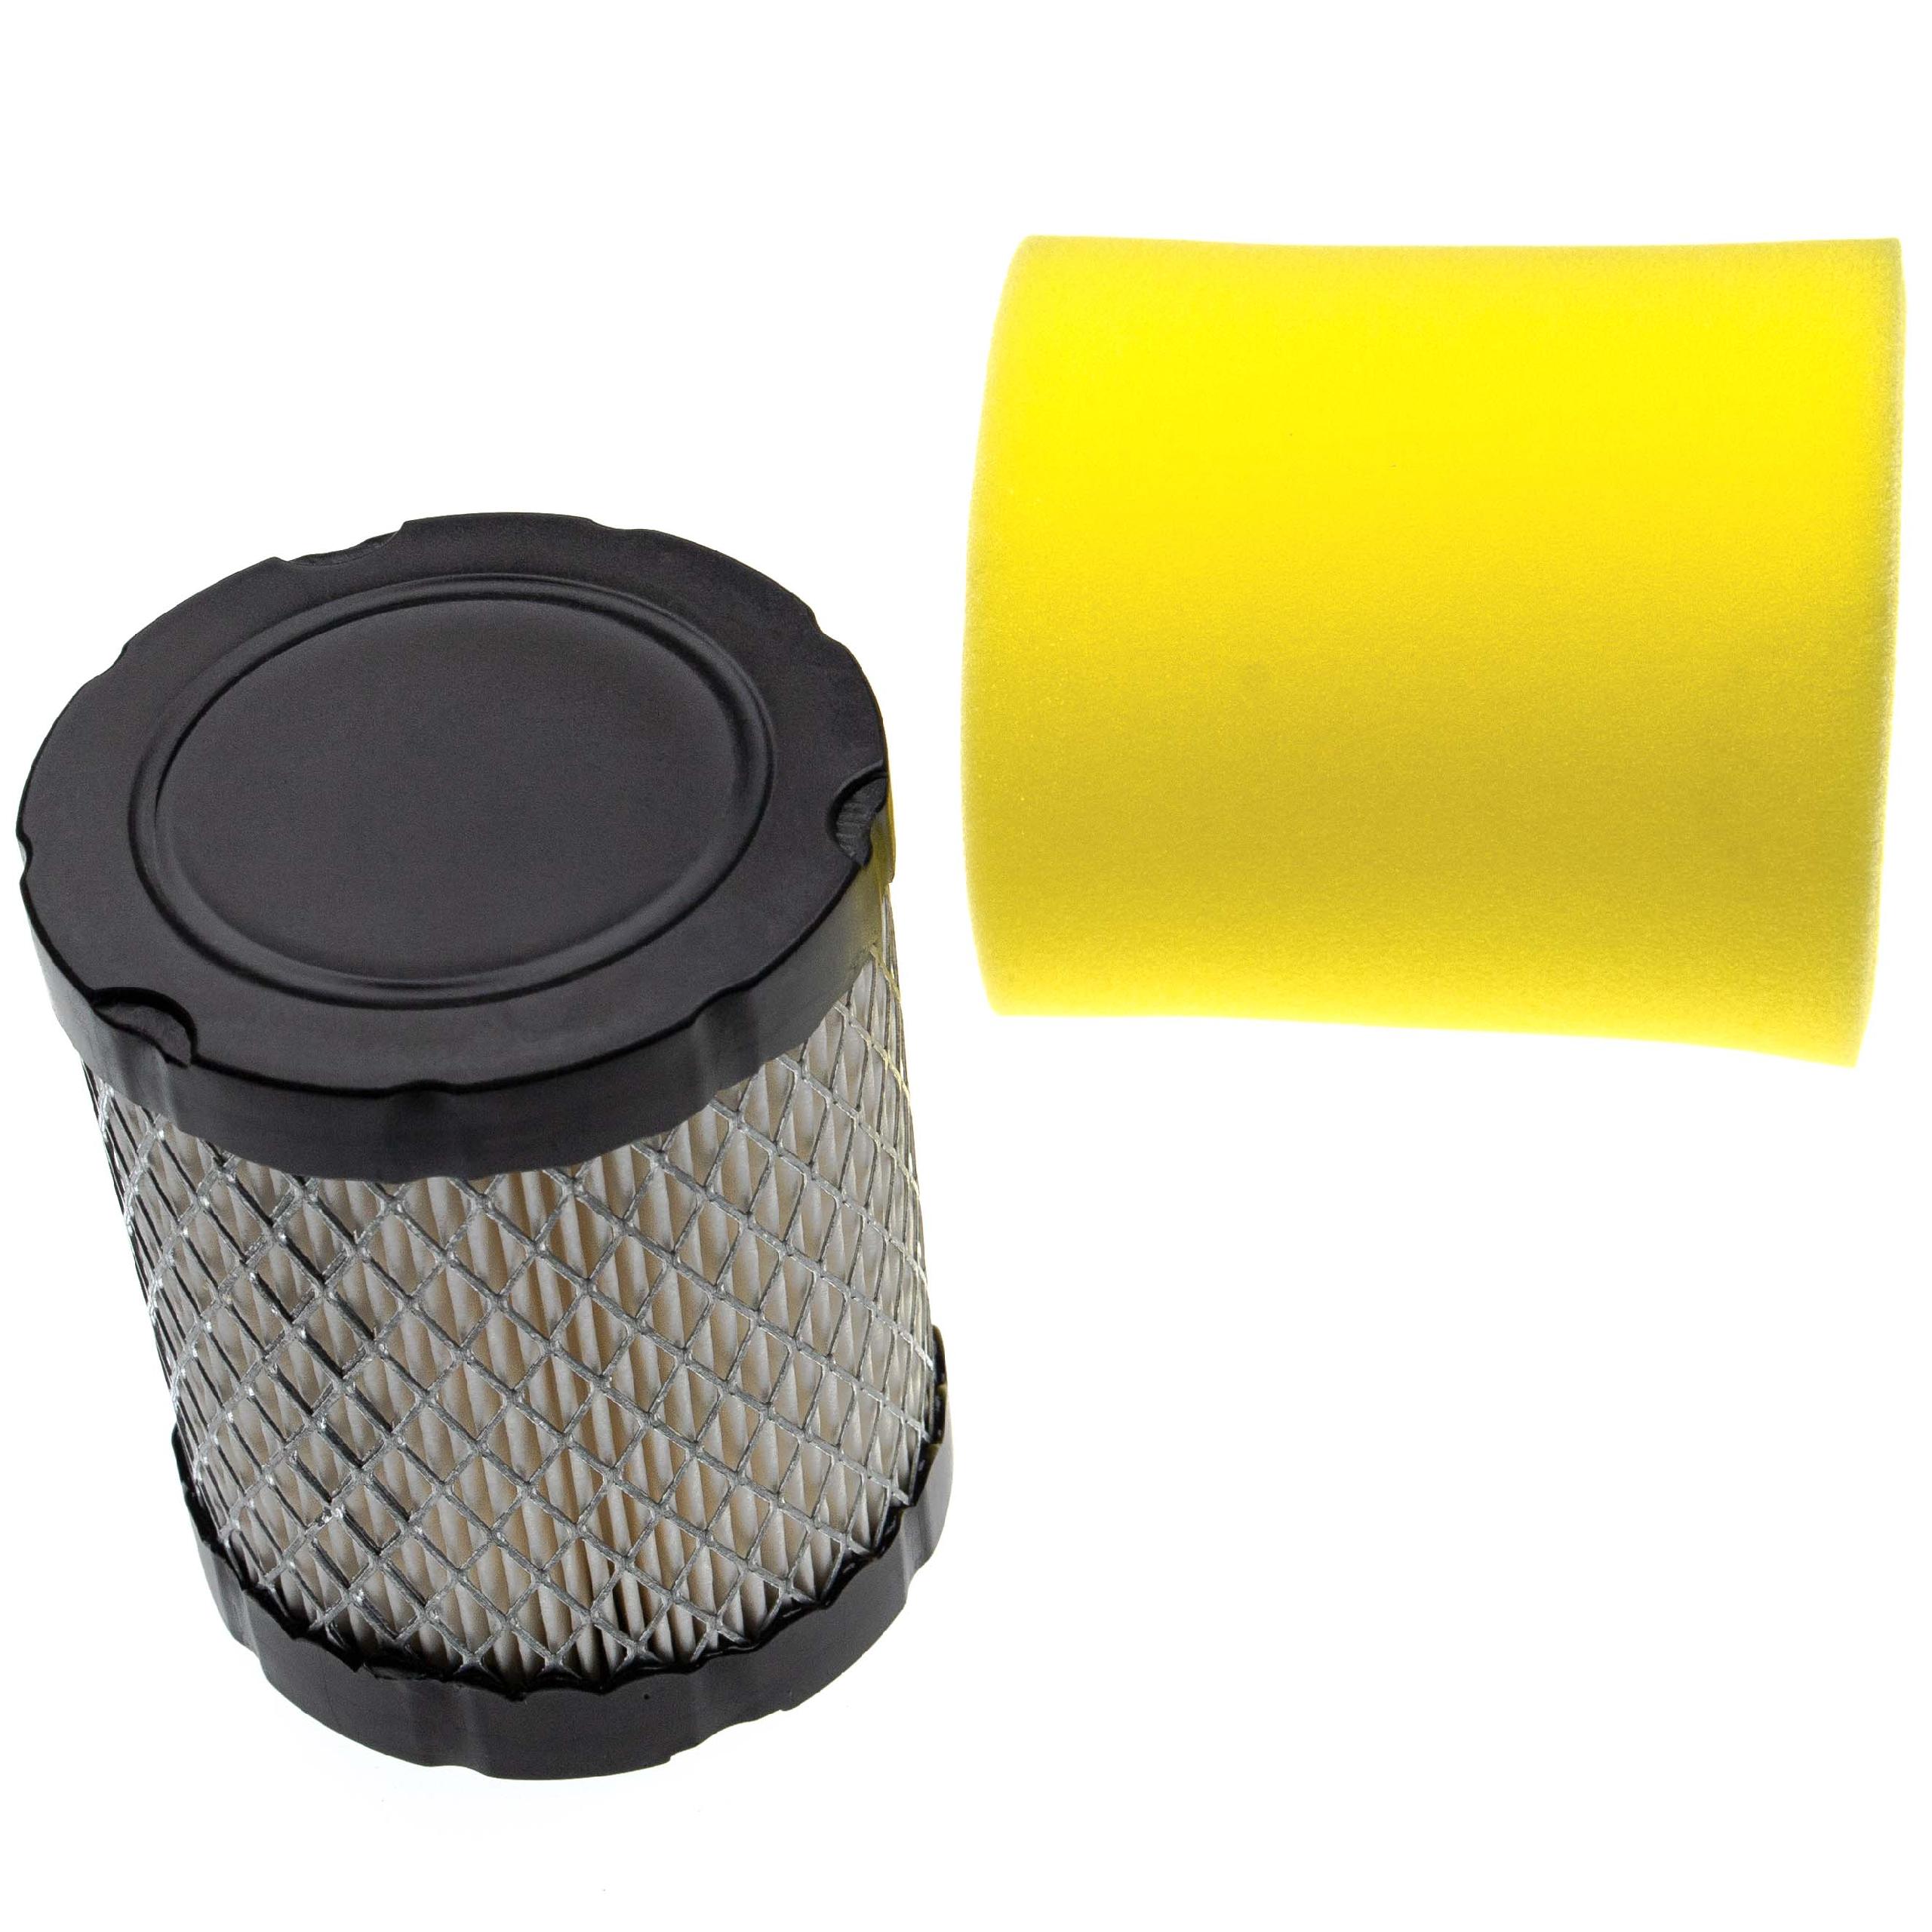 Filter Set as Spare for Briggs & Stratton 591583 for Lawn Tractor - 1x foam filter, 1x paper air filter